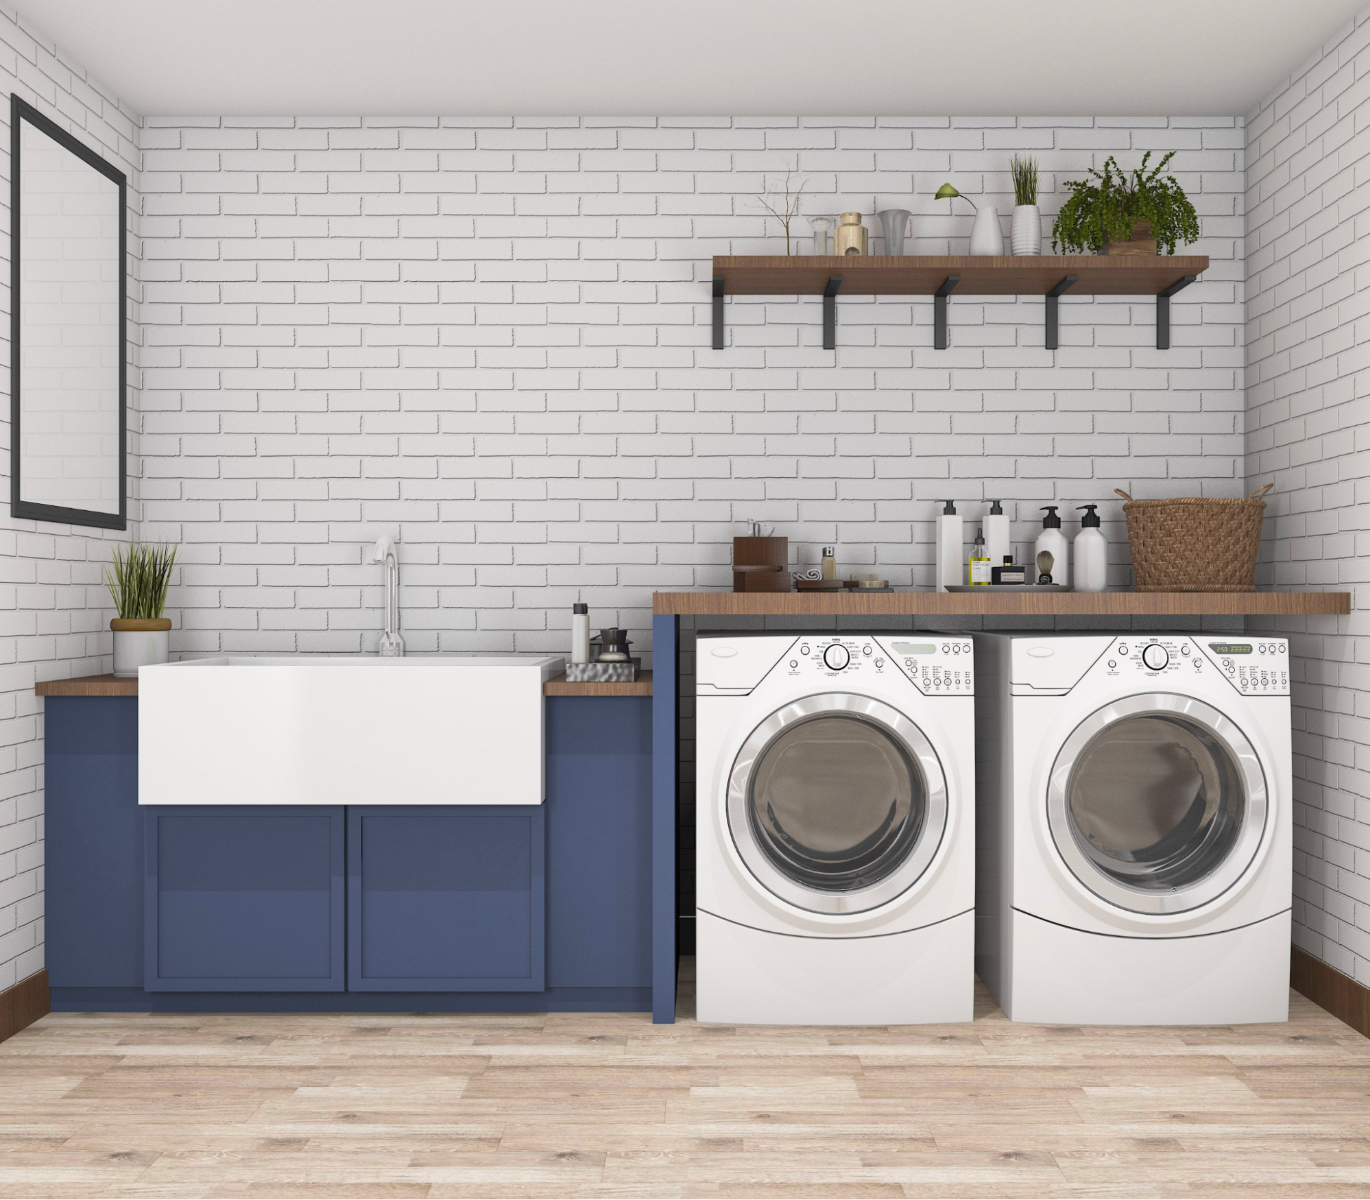 Small laundry room with side by side washer and dryer, blue vanity and white-coloured brick wall